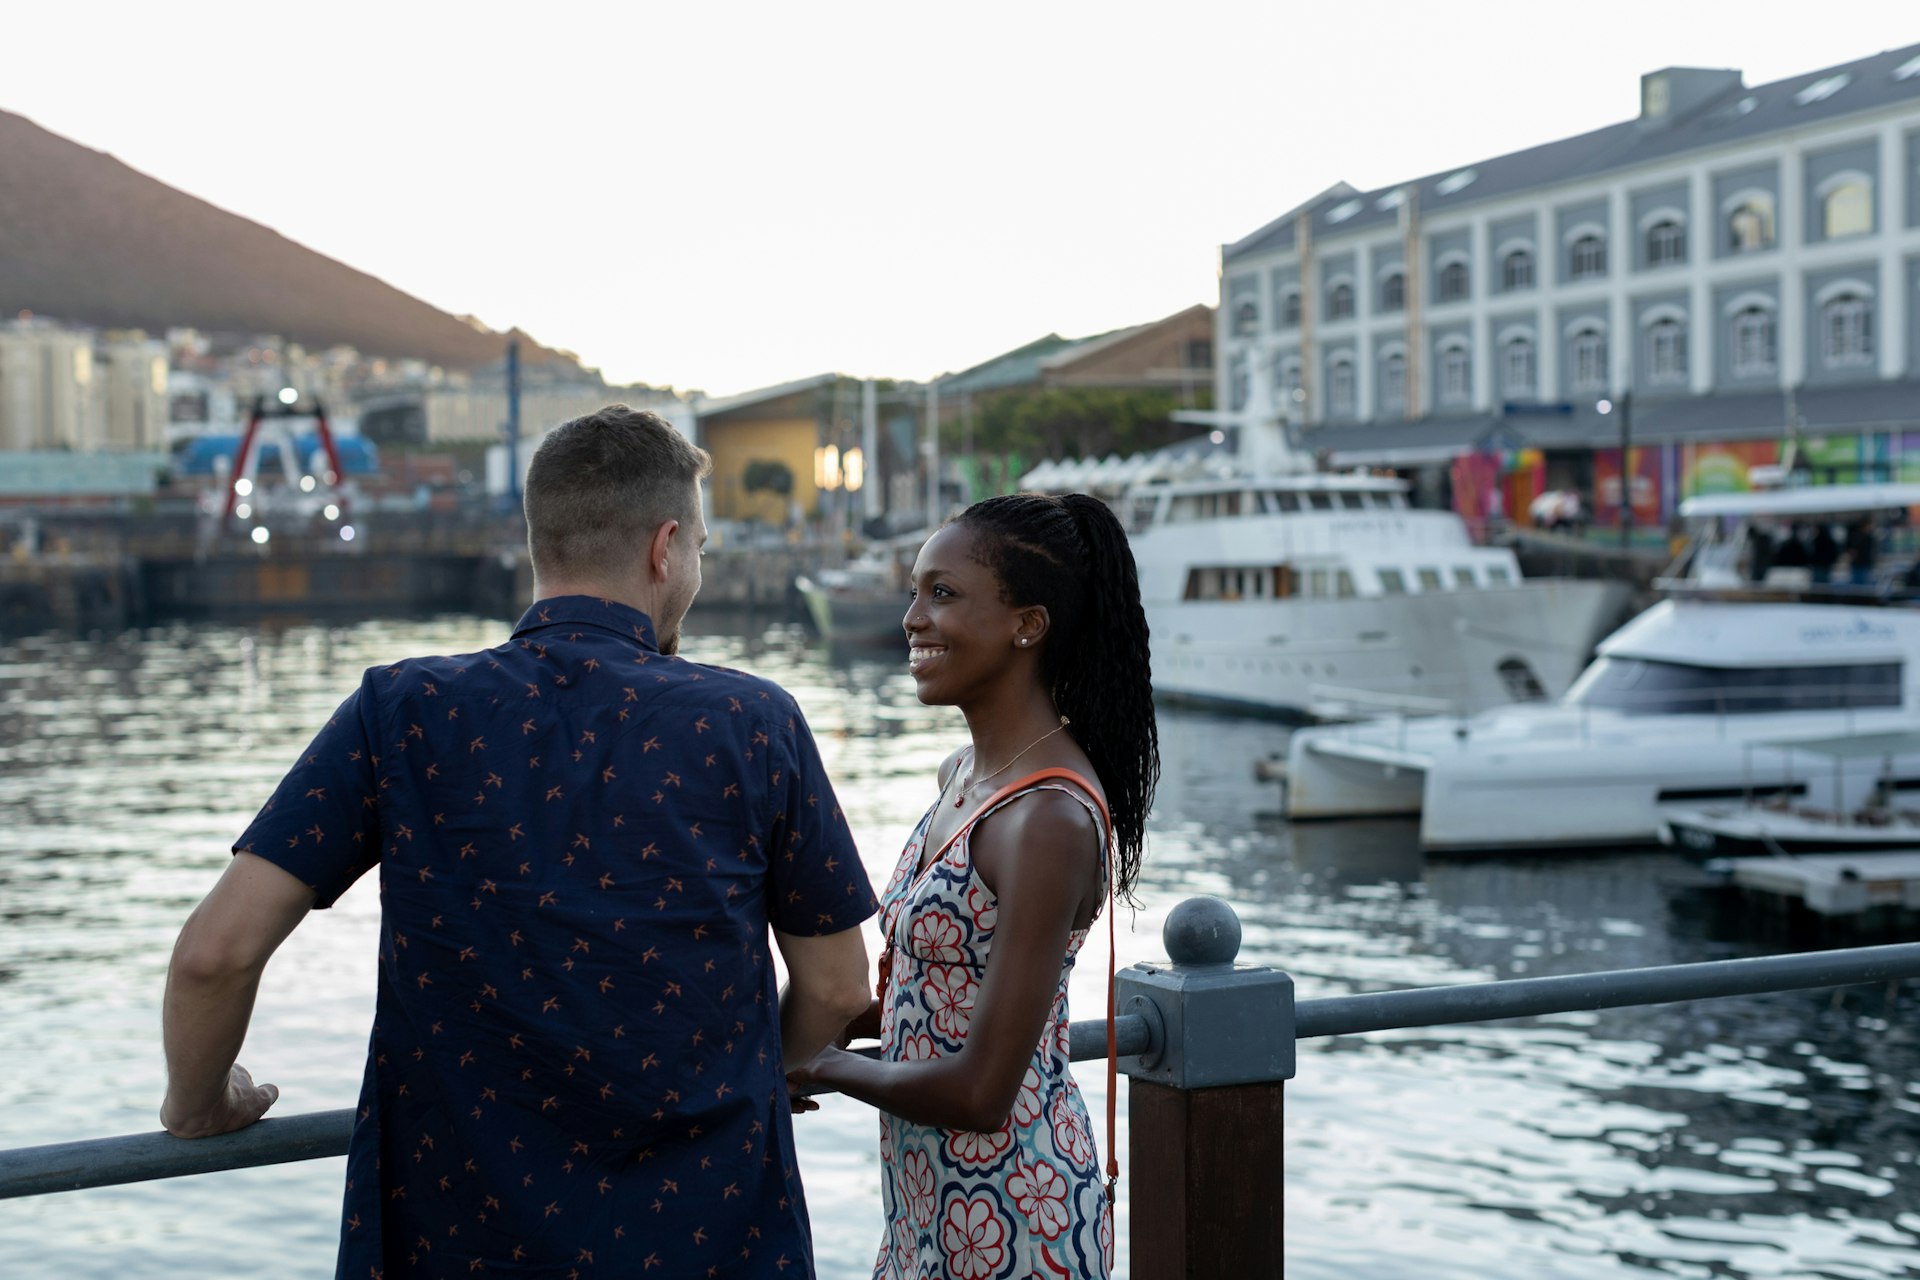 A couple stand together smiling at a waterfront where several boats are docked